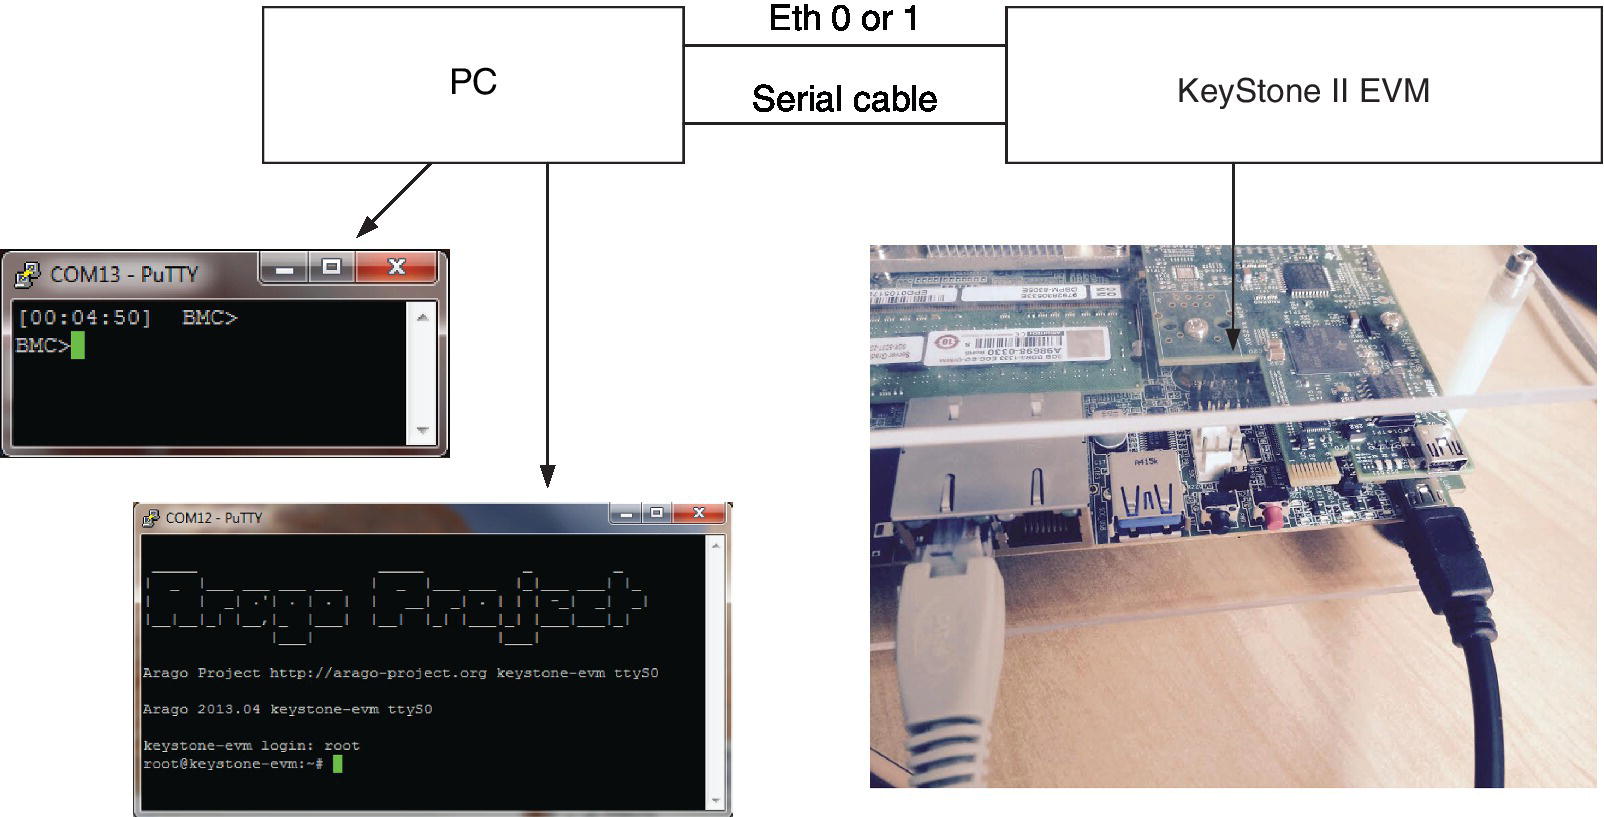 Schematic of EVM connection to the PC displaying COM13 – PuTTY and COM12 – PuTTY windows pointed by arrows from box labeled PC and photo pointed by an arrow from box labeled KeyStone II EVM.